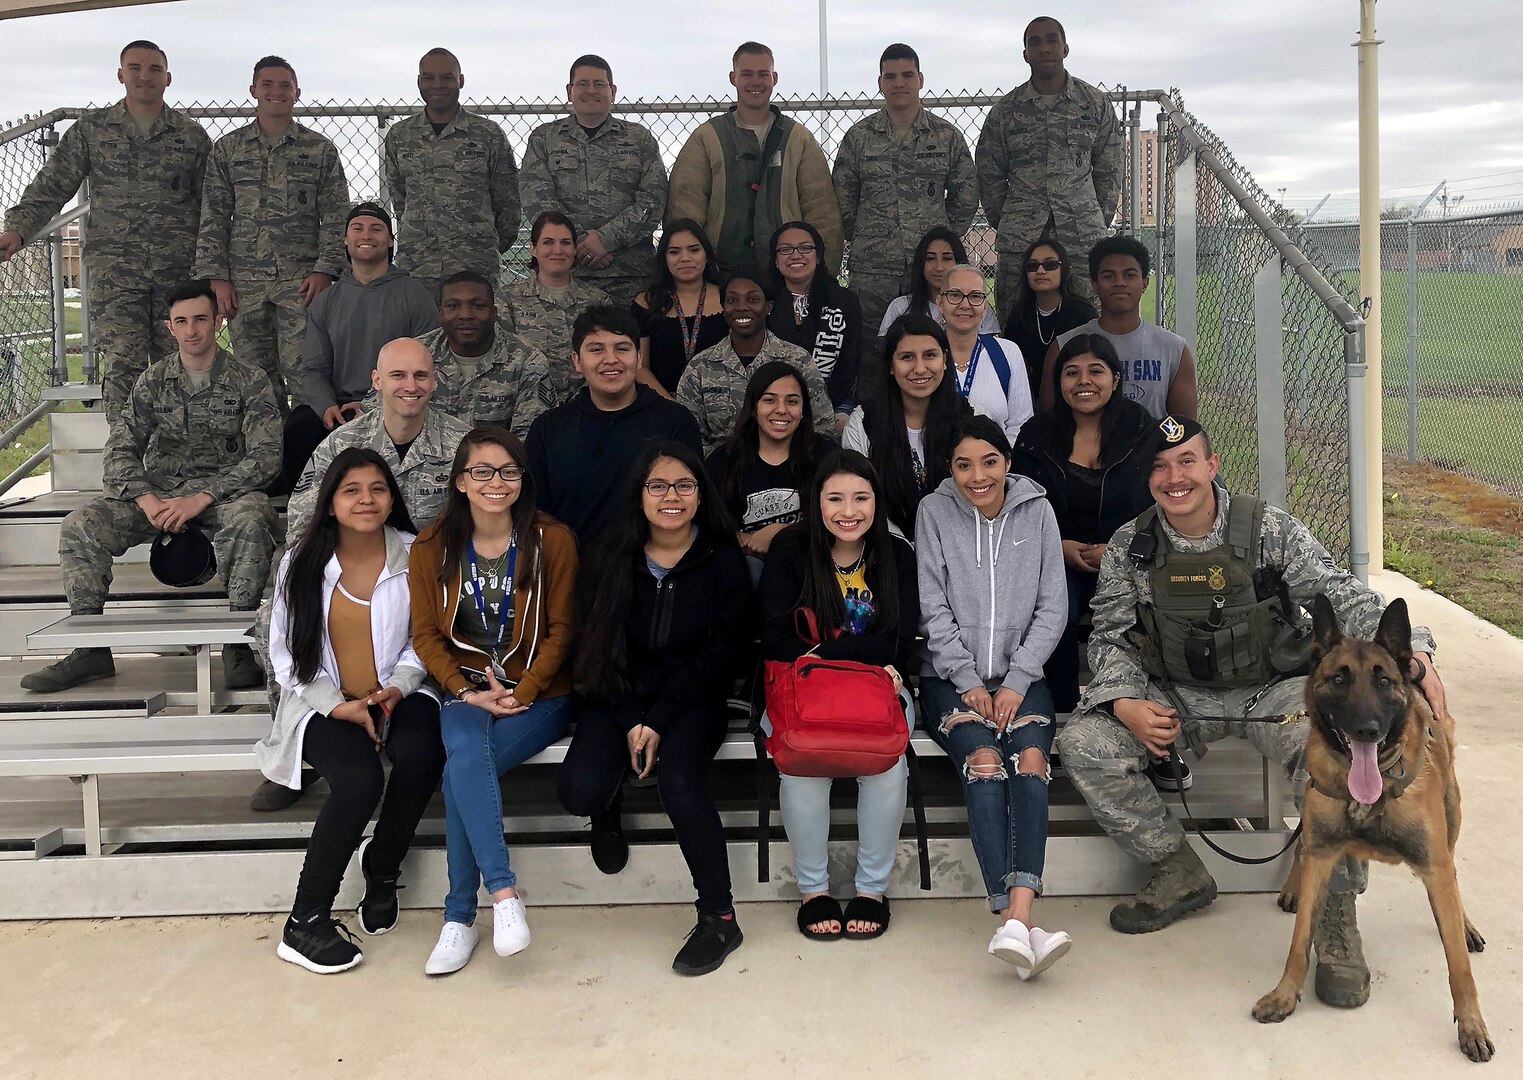 South San Antonio High School students and Joint Base San Antonio-Lackland Airmen pose for a photo during a Troops for Teens event at JBSA-Lackland March 9. Troops for Teens, a joint SSAHS and Air Forces Cyber volunteer program, links Airmen mentors with at-risk teens